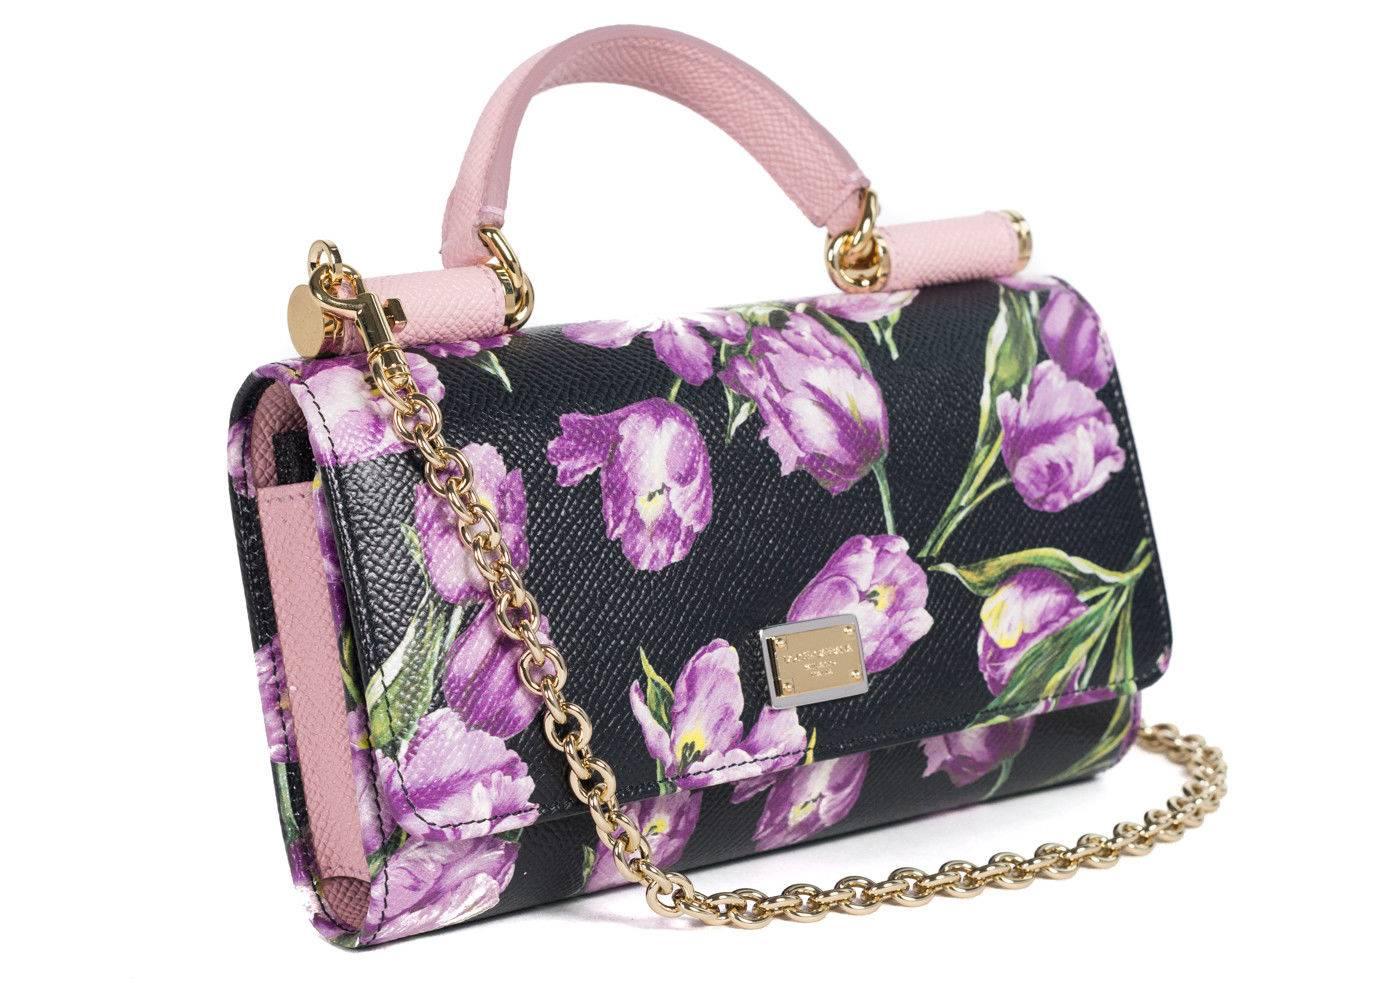 Brand New Dolce&Gabbana Shoulder Bag
Original Tags & Dust Bag Included
Retails in Stores & Online for $1171

Dolce & Gabbana's Von wallet shoulder bag in a purple floral printed pattern and pink top handles. This black floral bag is